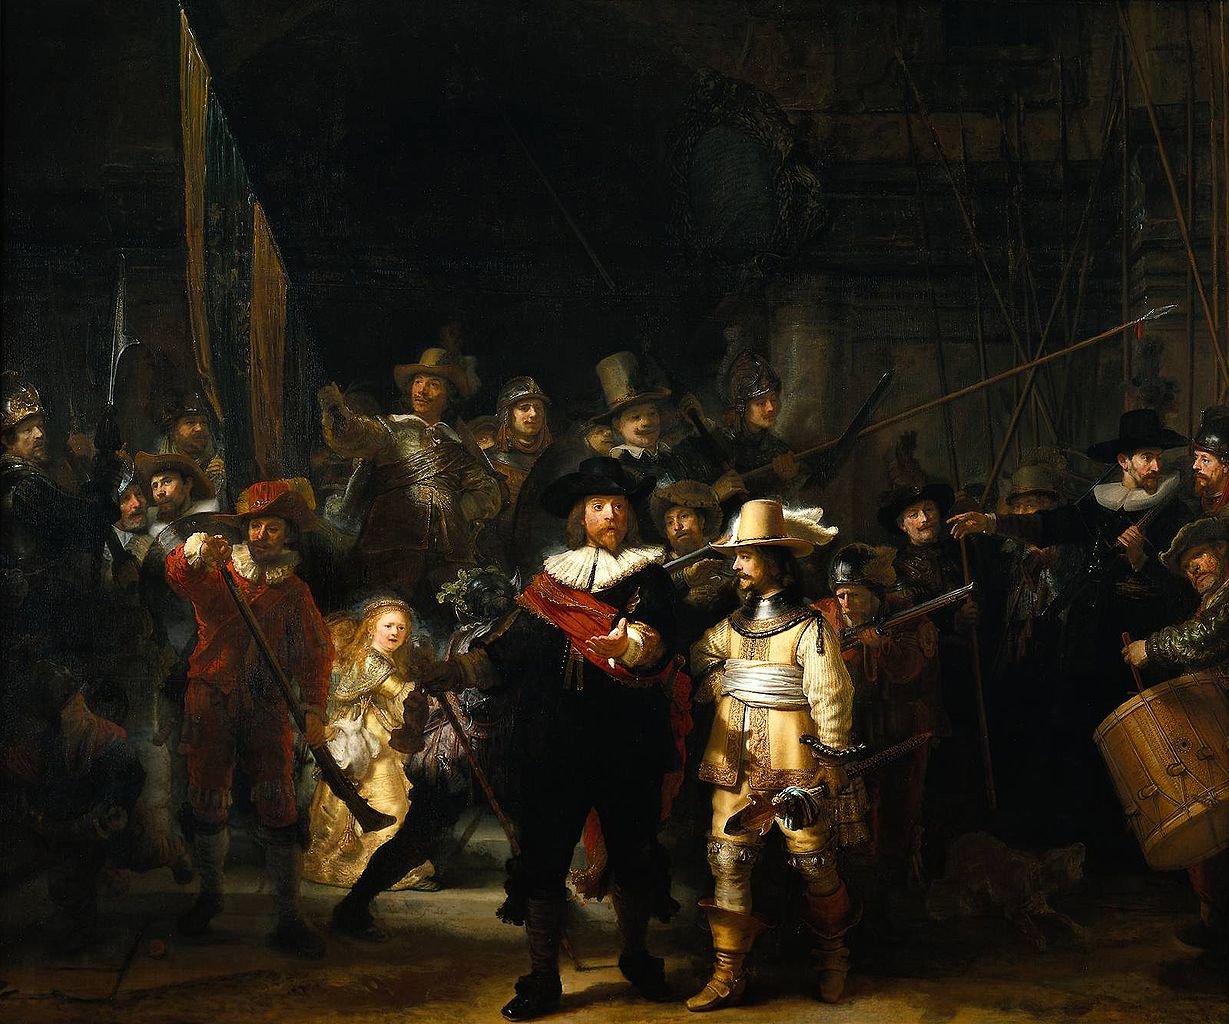 Image:1229px-The Nightwatch by Rembrandt.jpg